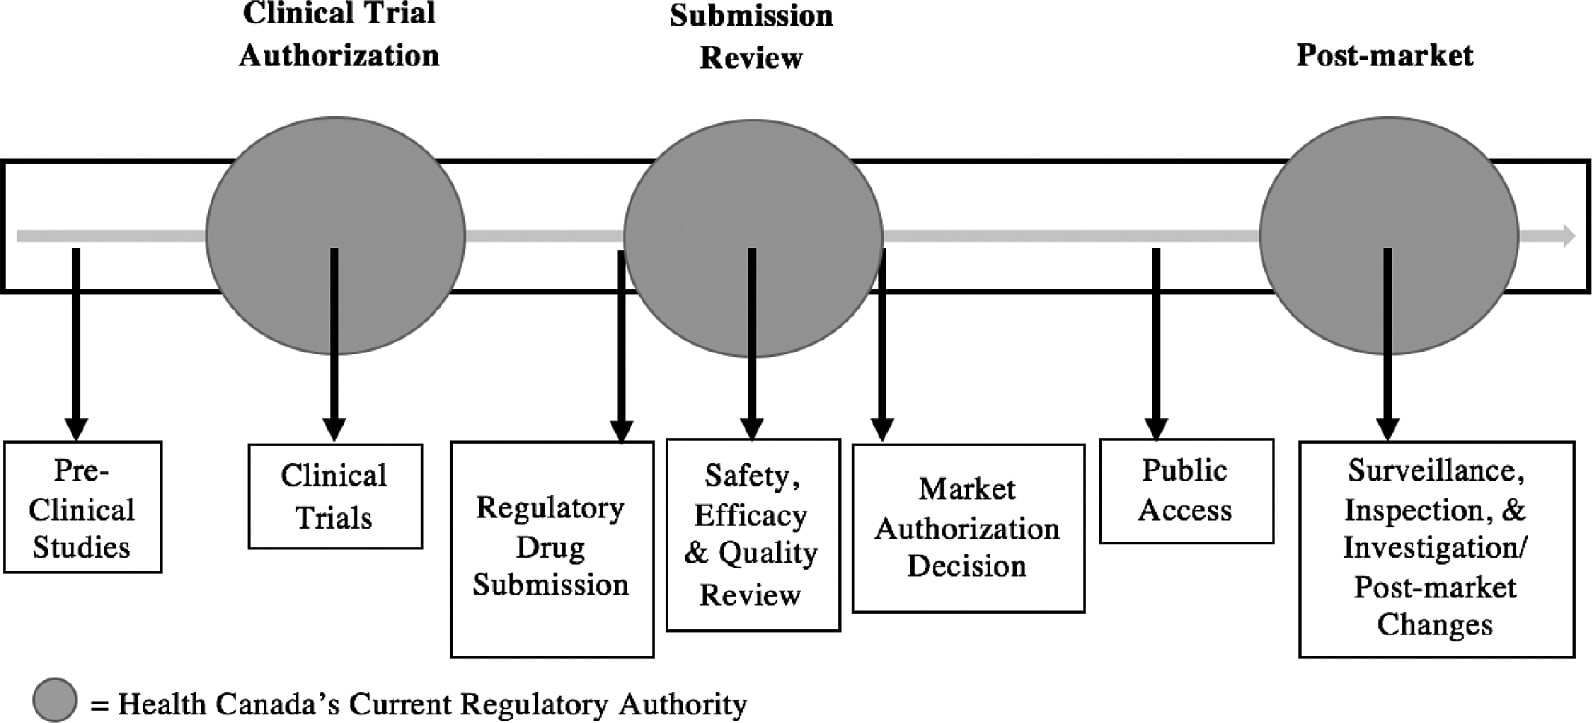 Flowchart showing Health Canada’s review process for new Canadian drugs, which includes clinical trials, safety and efficacy reviews, and ongoing monitoring after the drug goes on the market